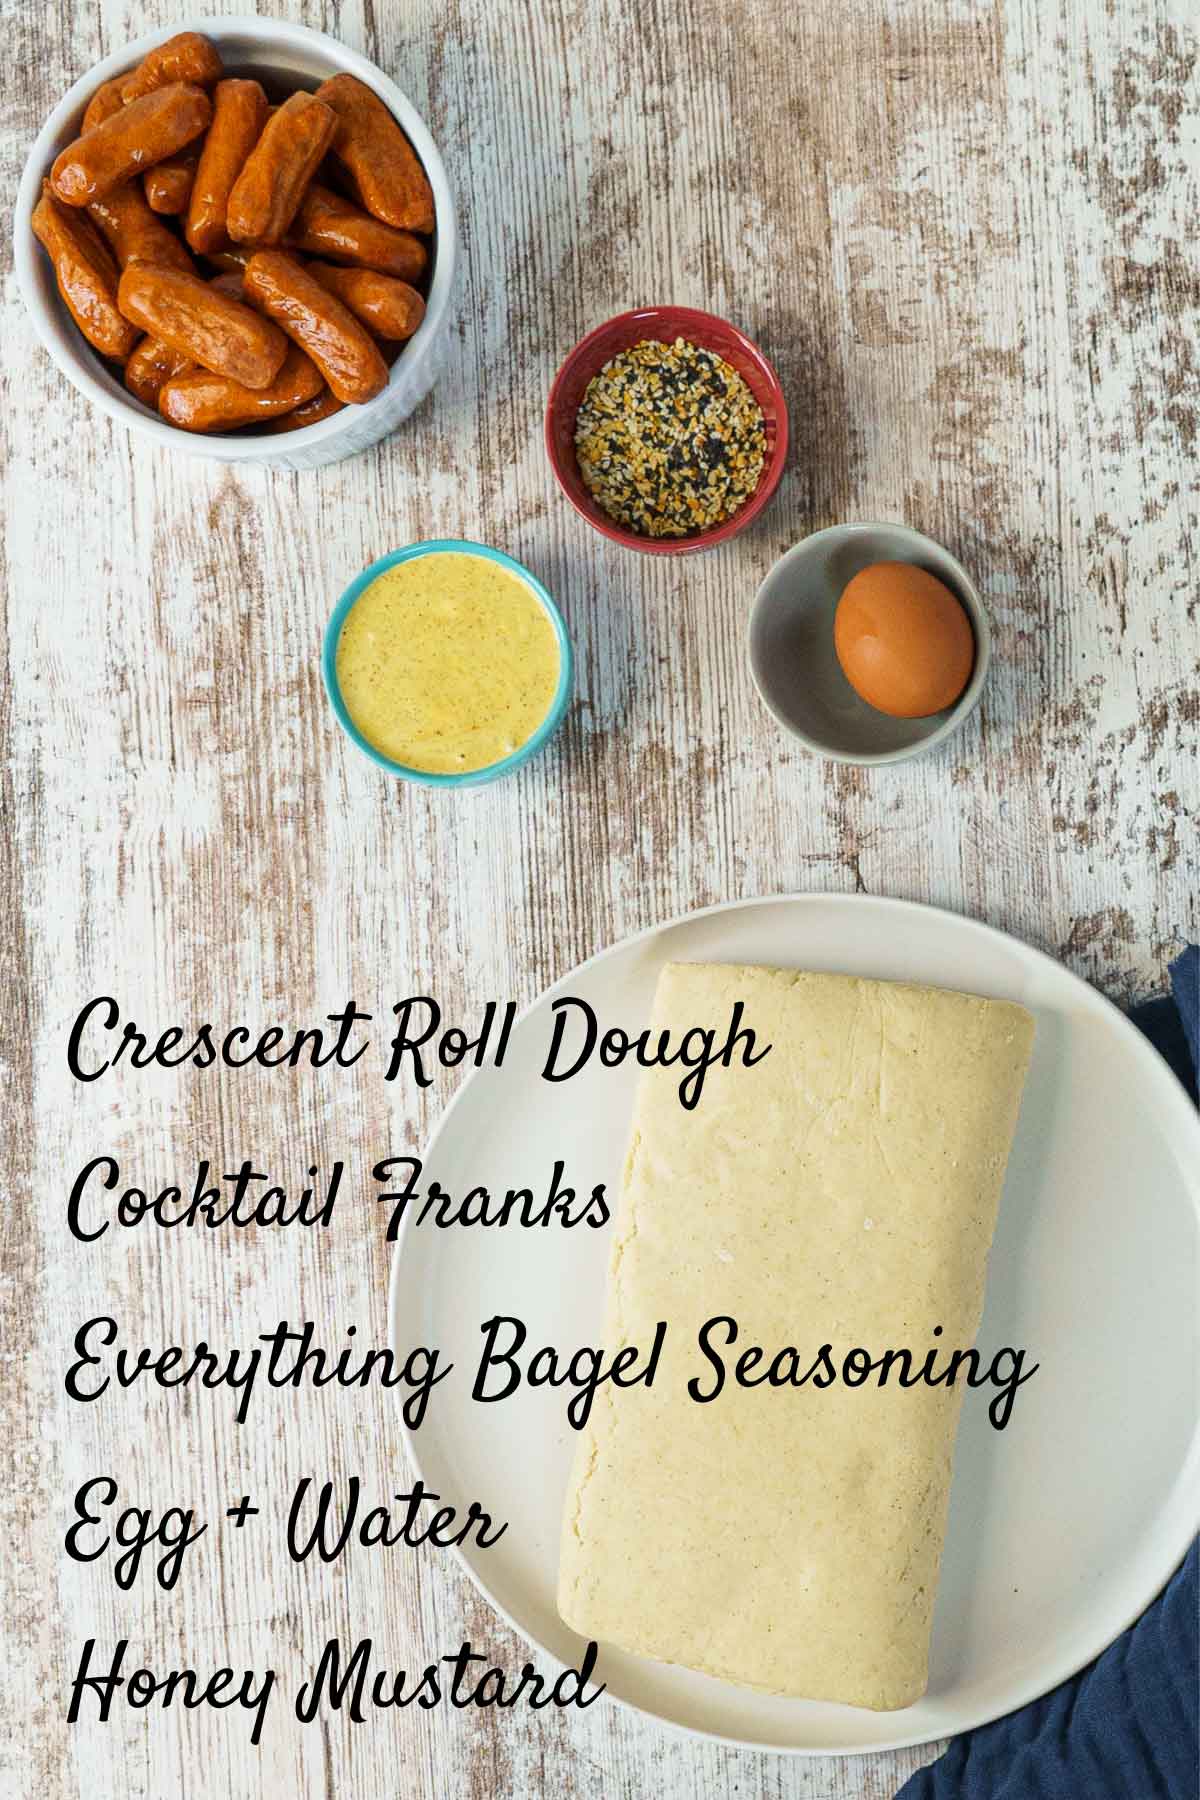 mini crescent dog ingredients on the counter with raw crescent roll dough